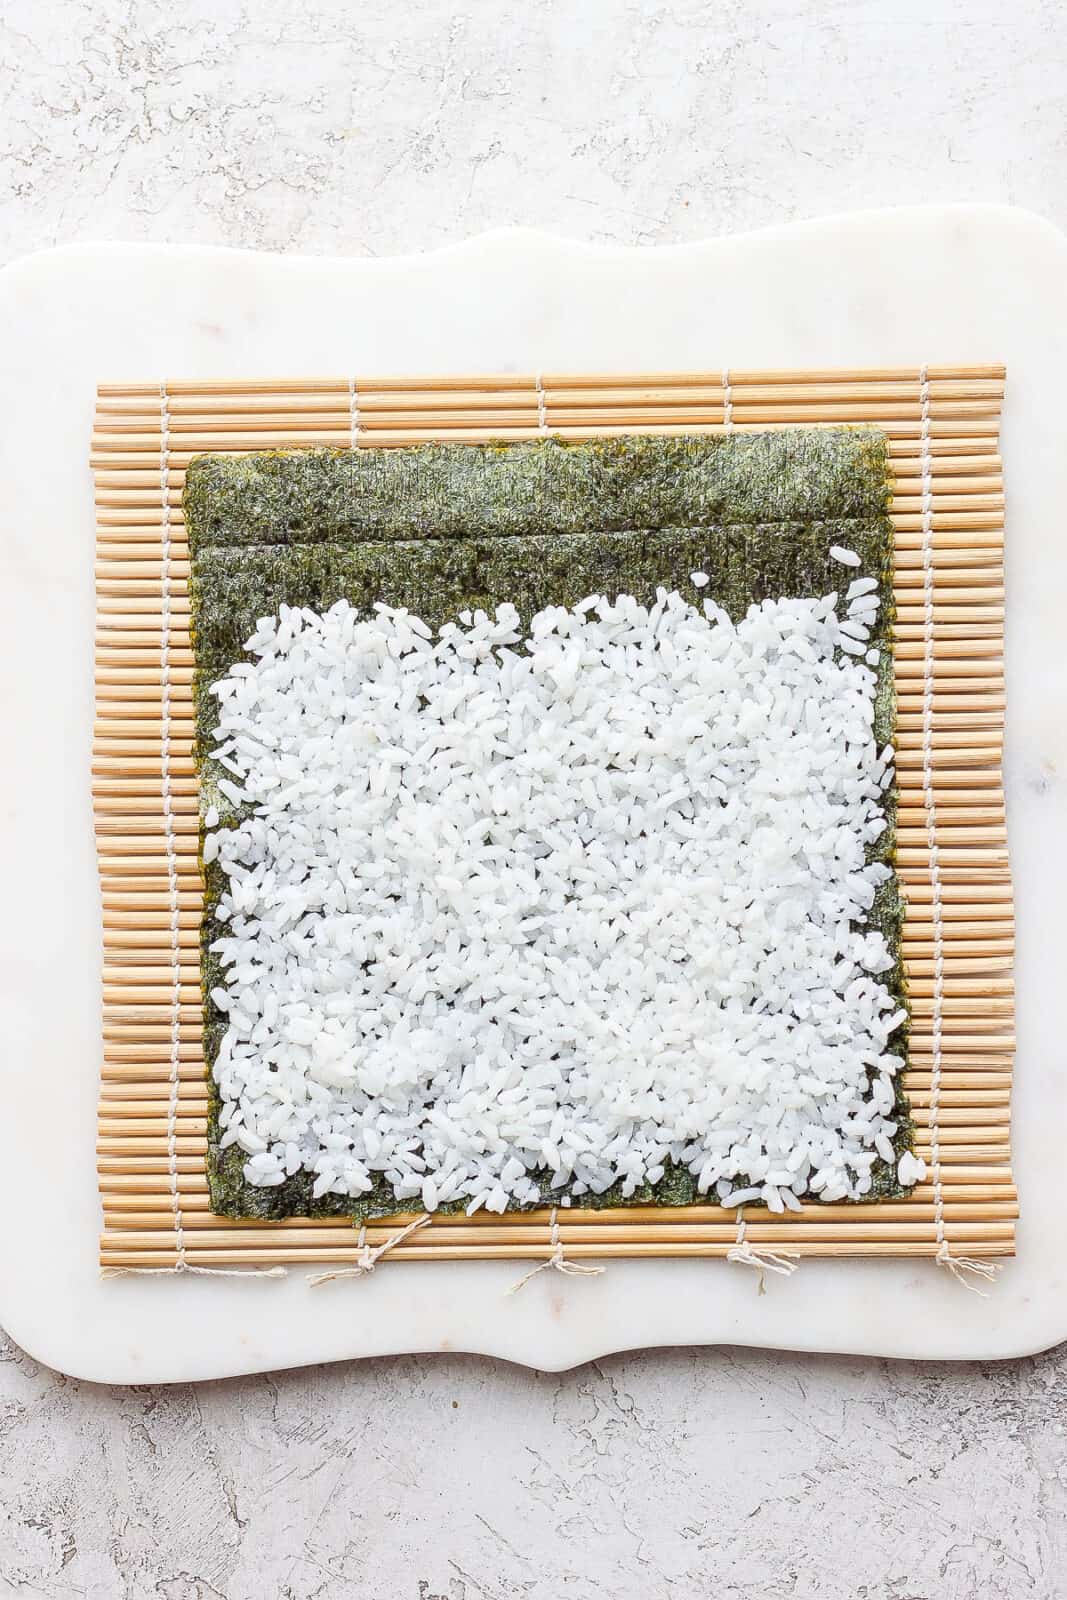 A thin layer of rice spread on top of a nori sheet.